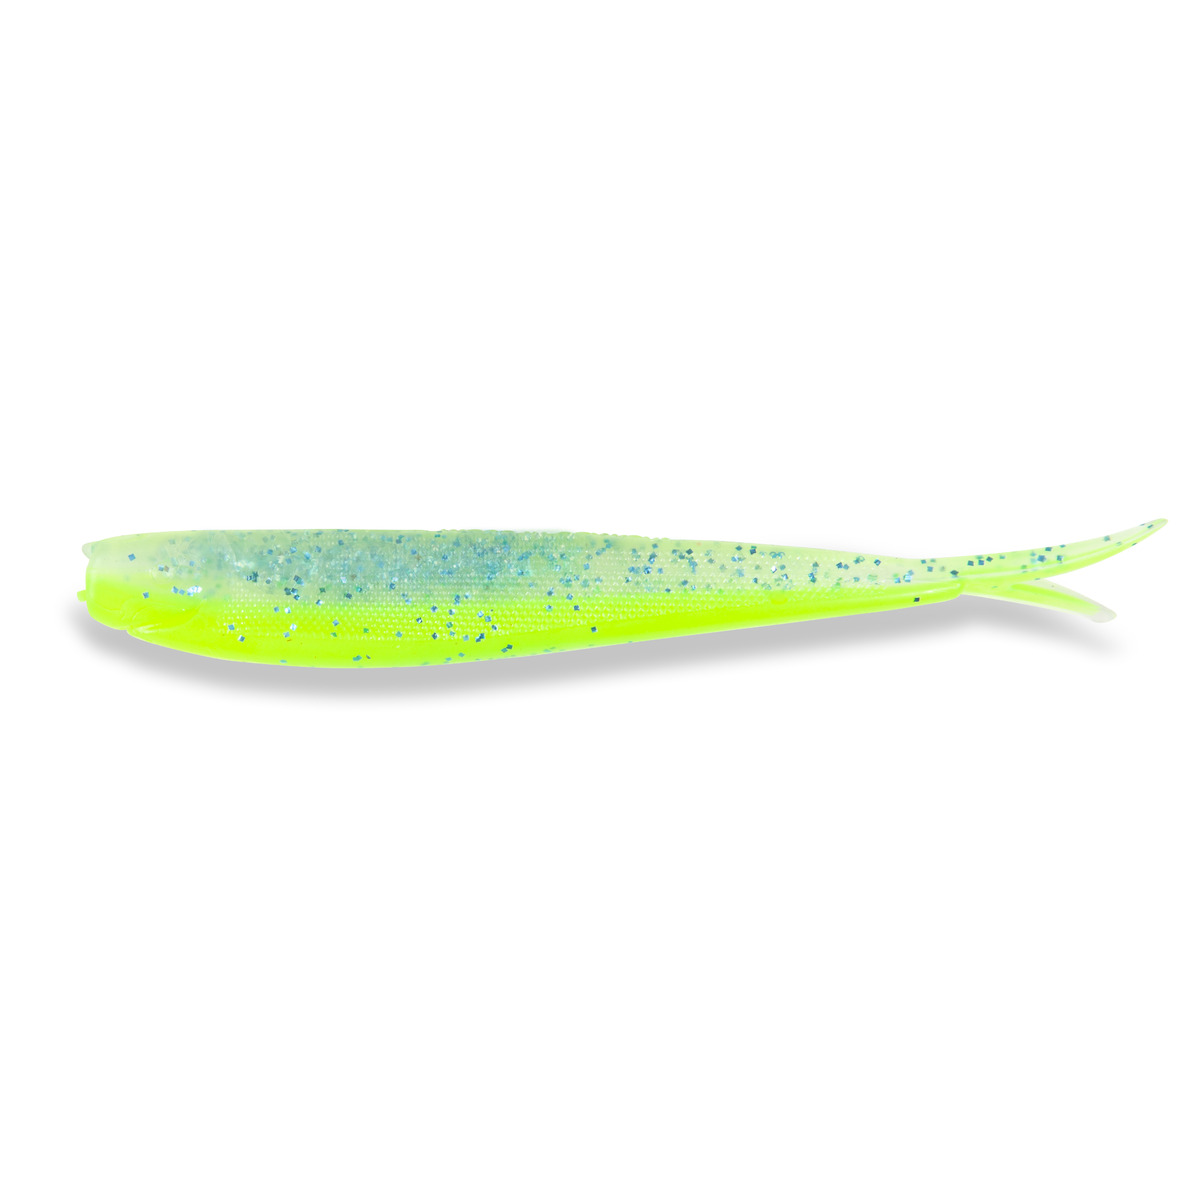 Iron Claw Moby V-tail 19 Cm - 20 MM UV